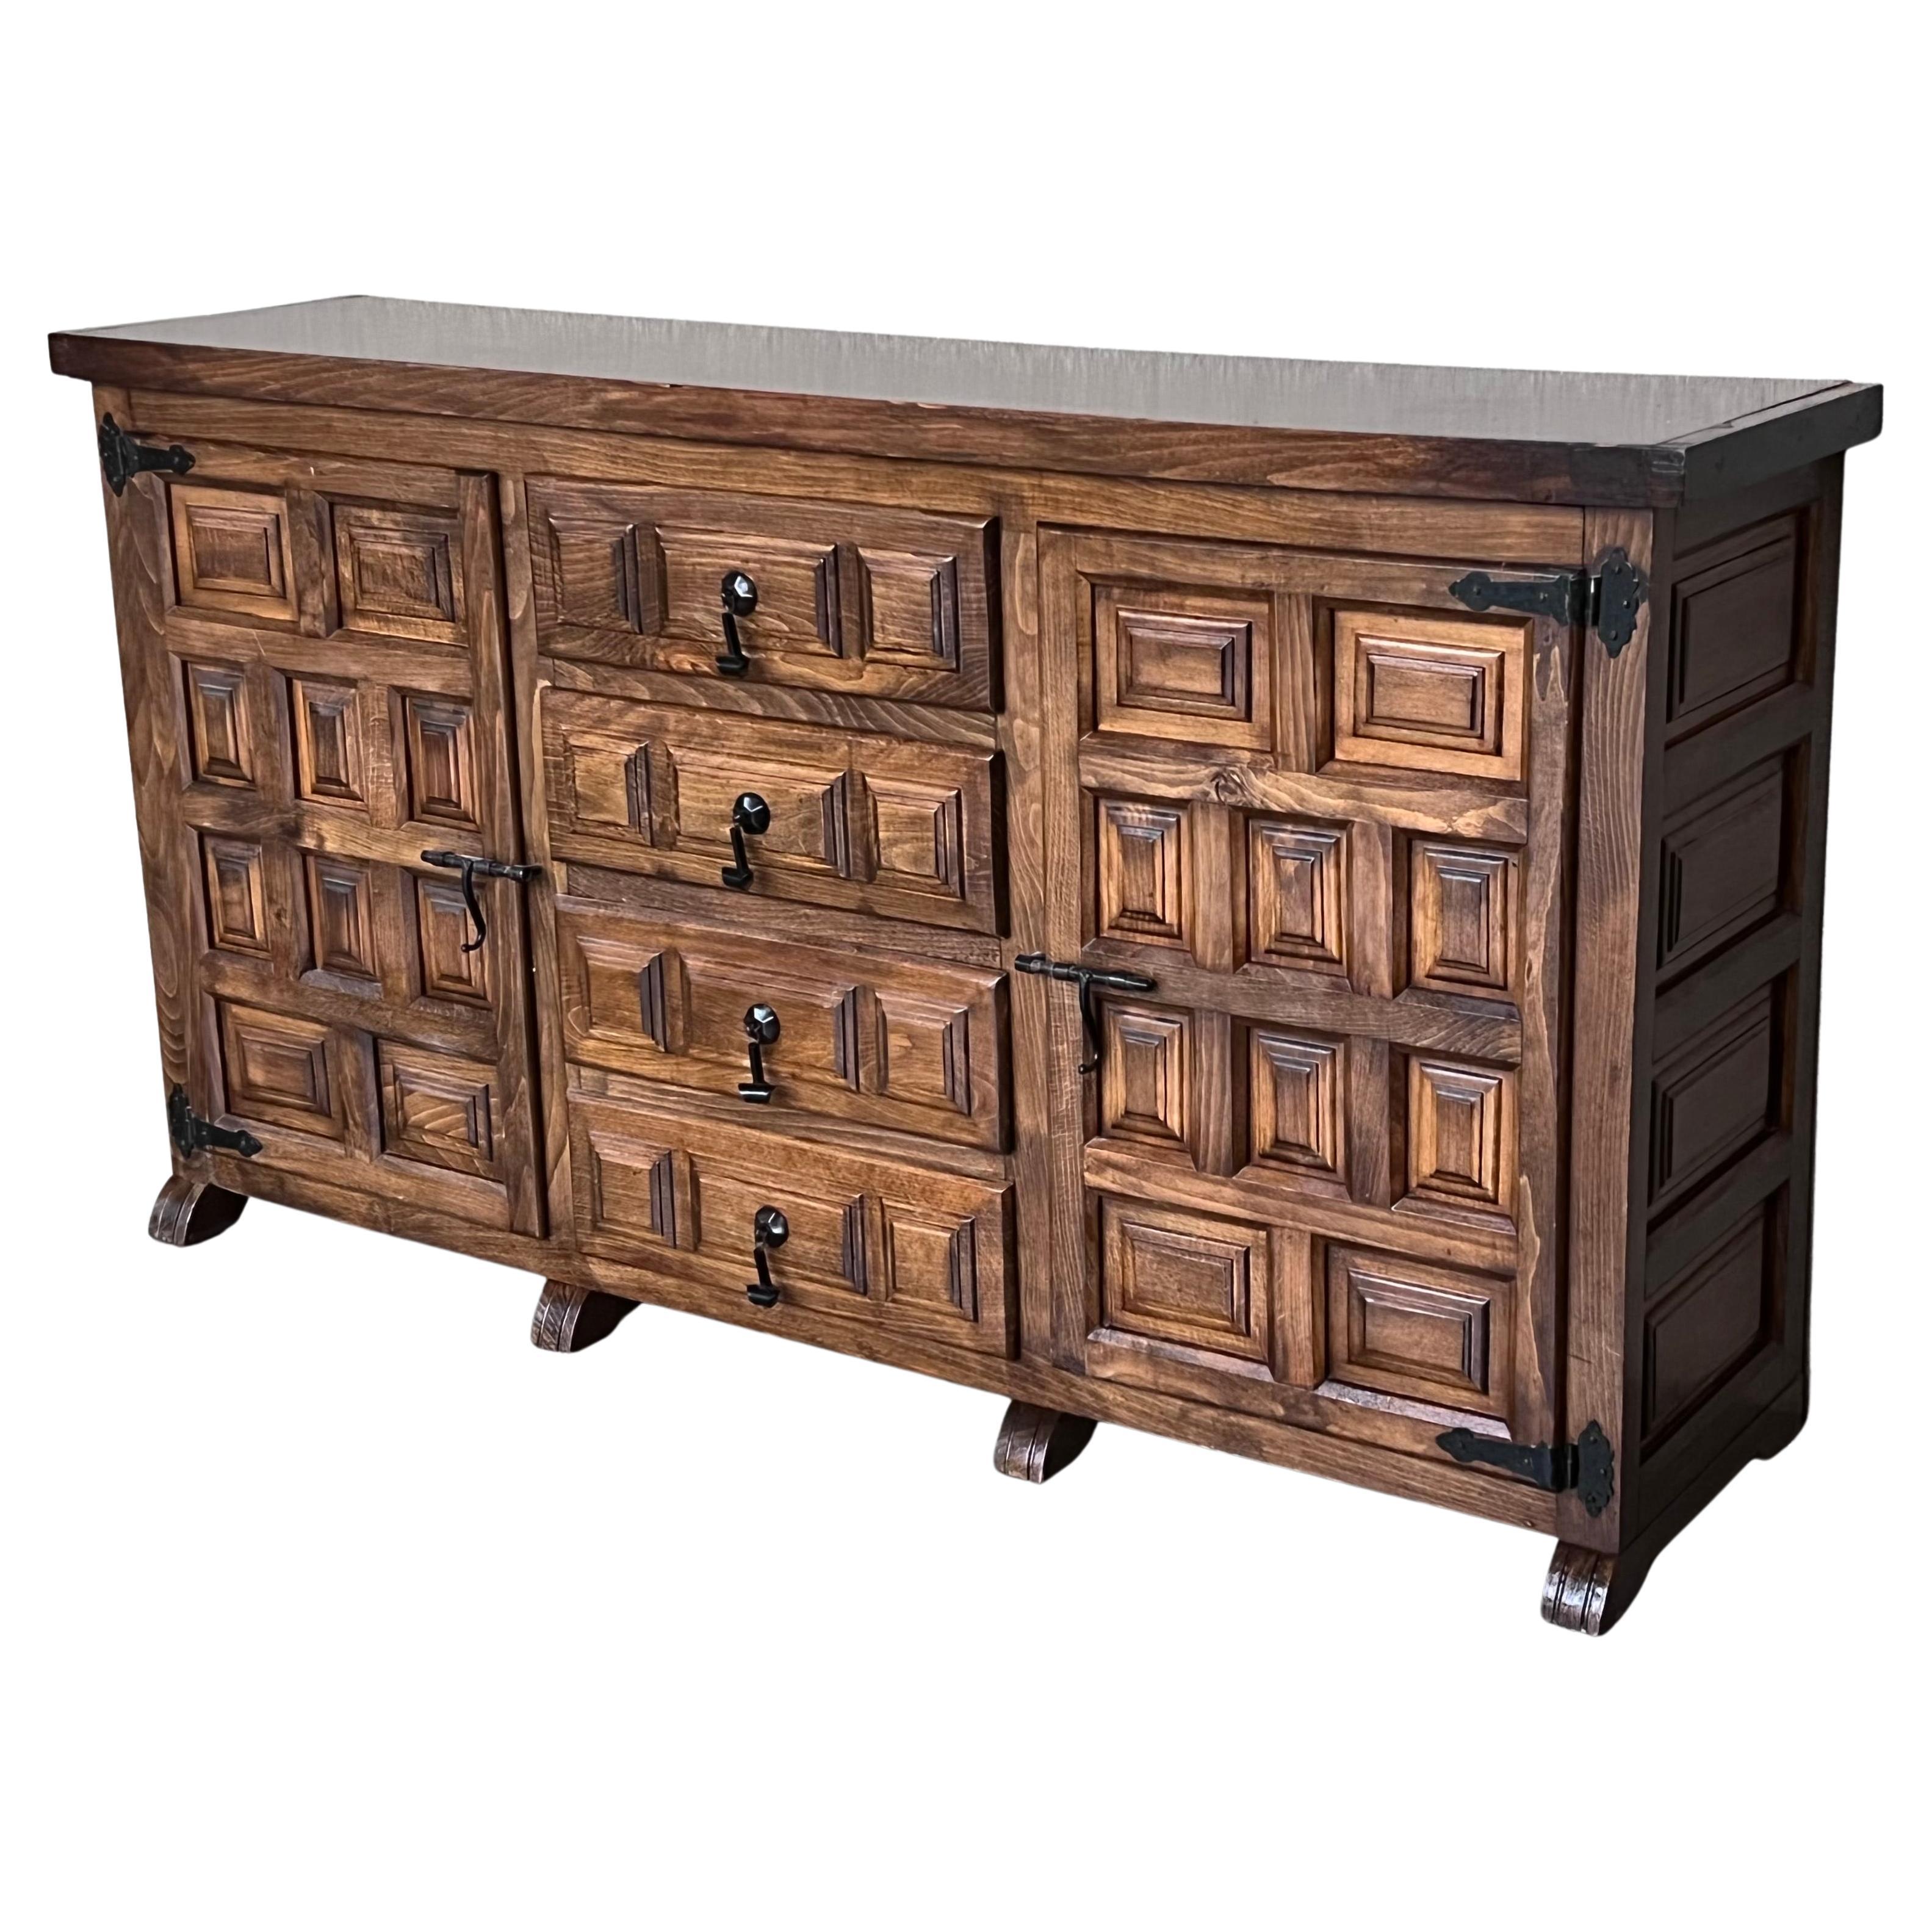 Spanish Buffet or Cabinet with Thre Doors and Central Drawers with Iron Hardware